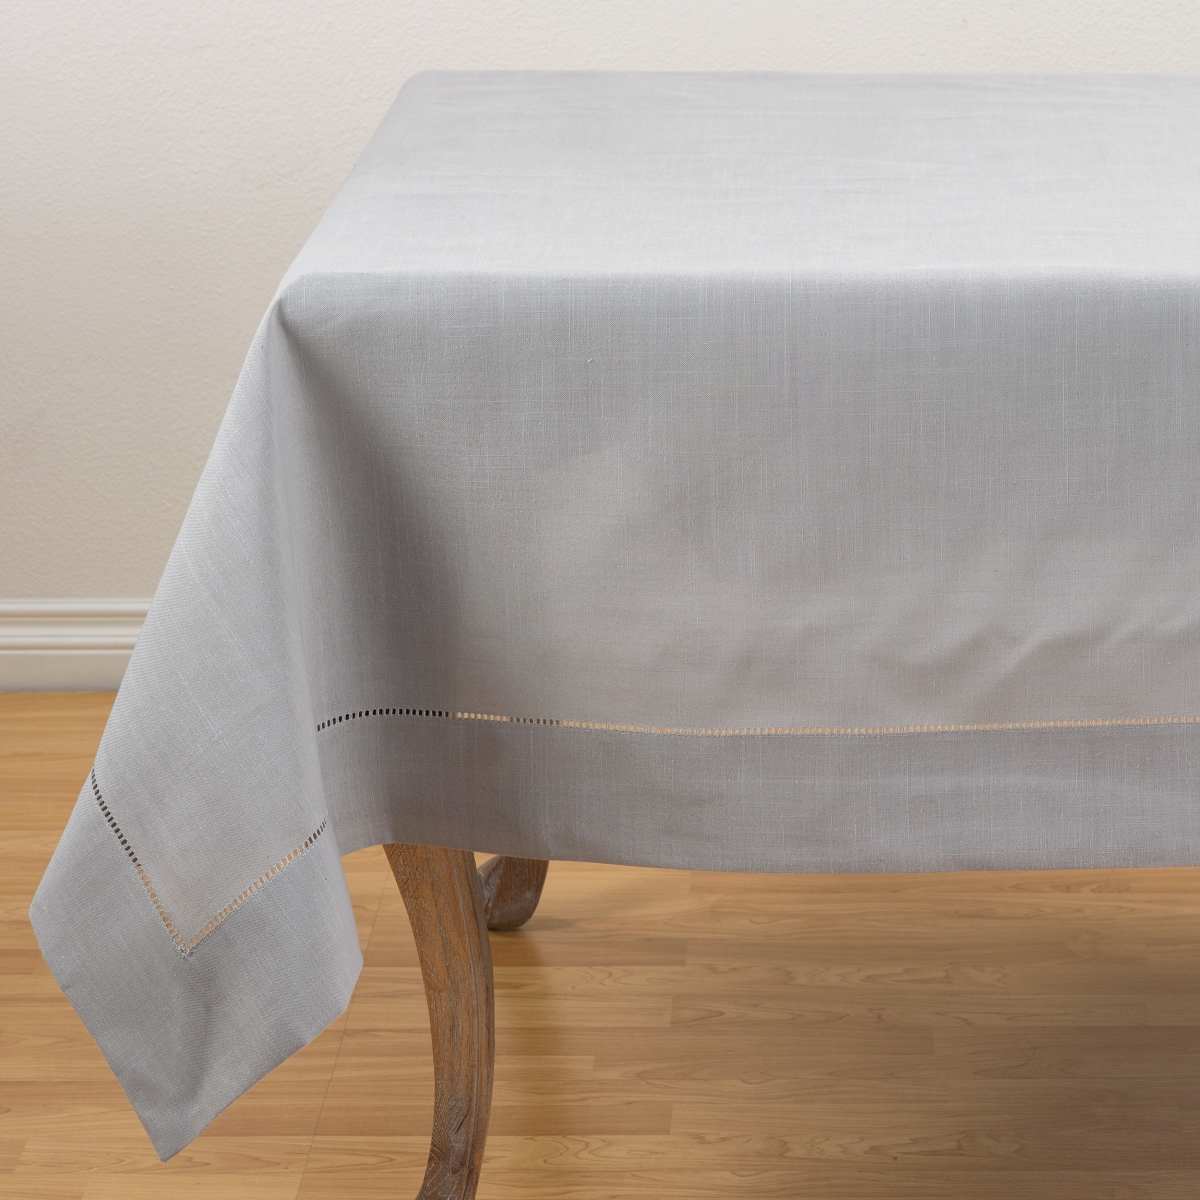 Picture of SARO 6302.GY60S 60 in. Square Classic Hemstitch Border Tablecloth  Grey